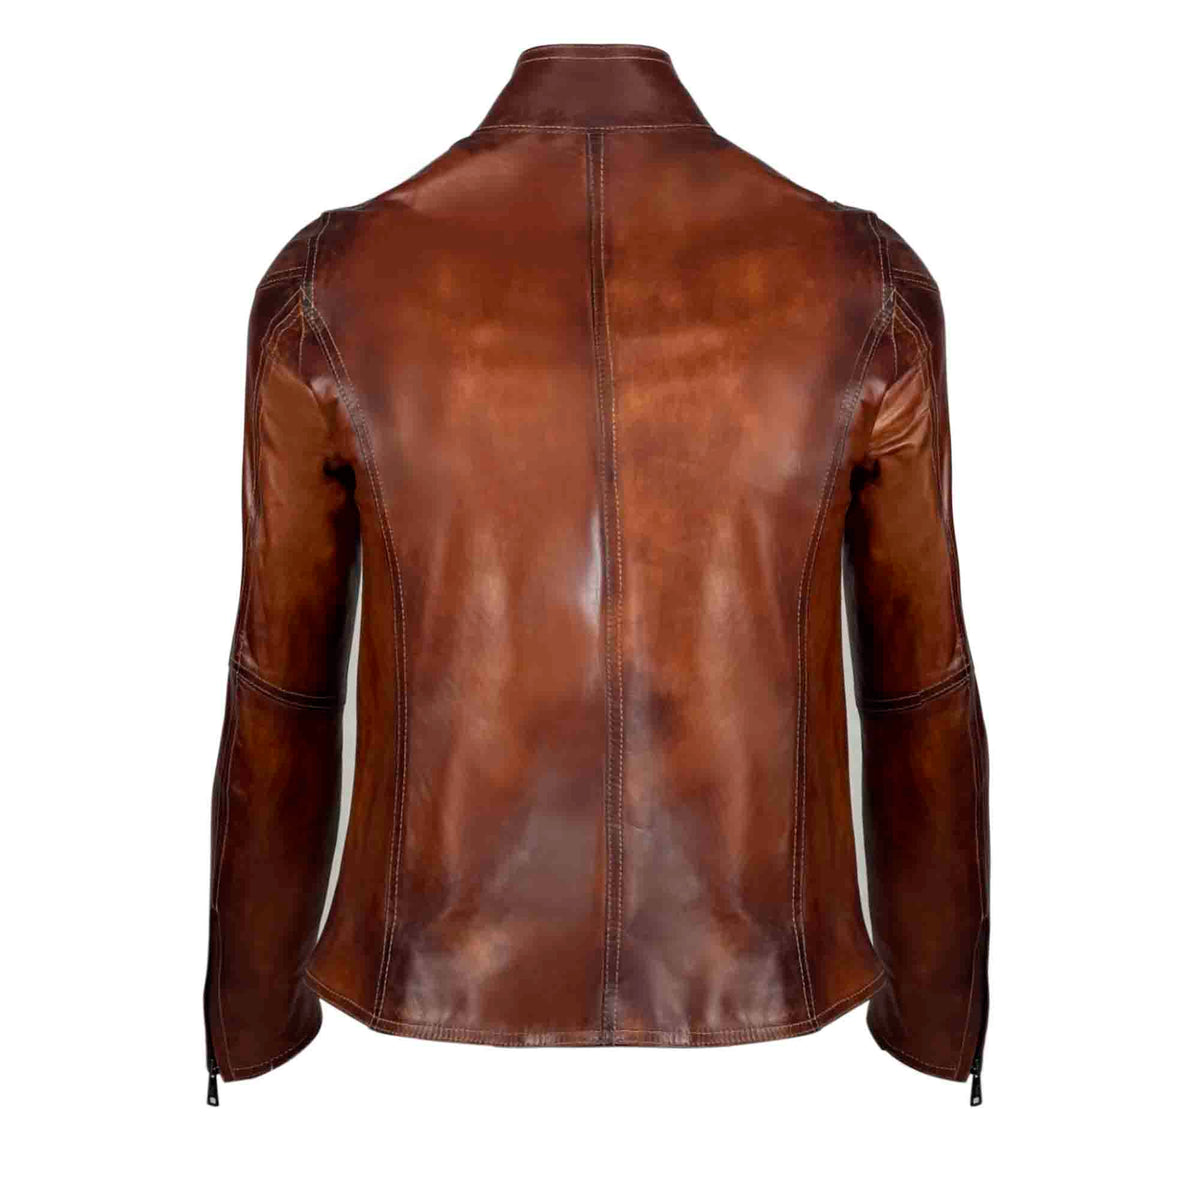 Women's high quality brown vegetable tanned leather jacket